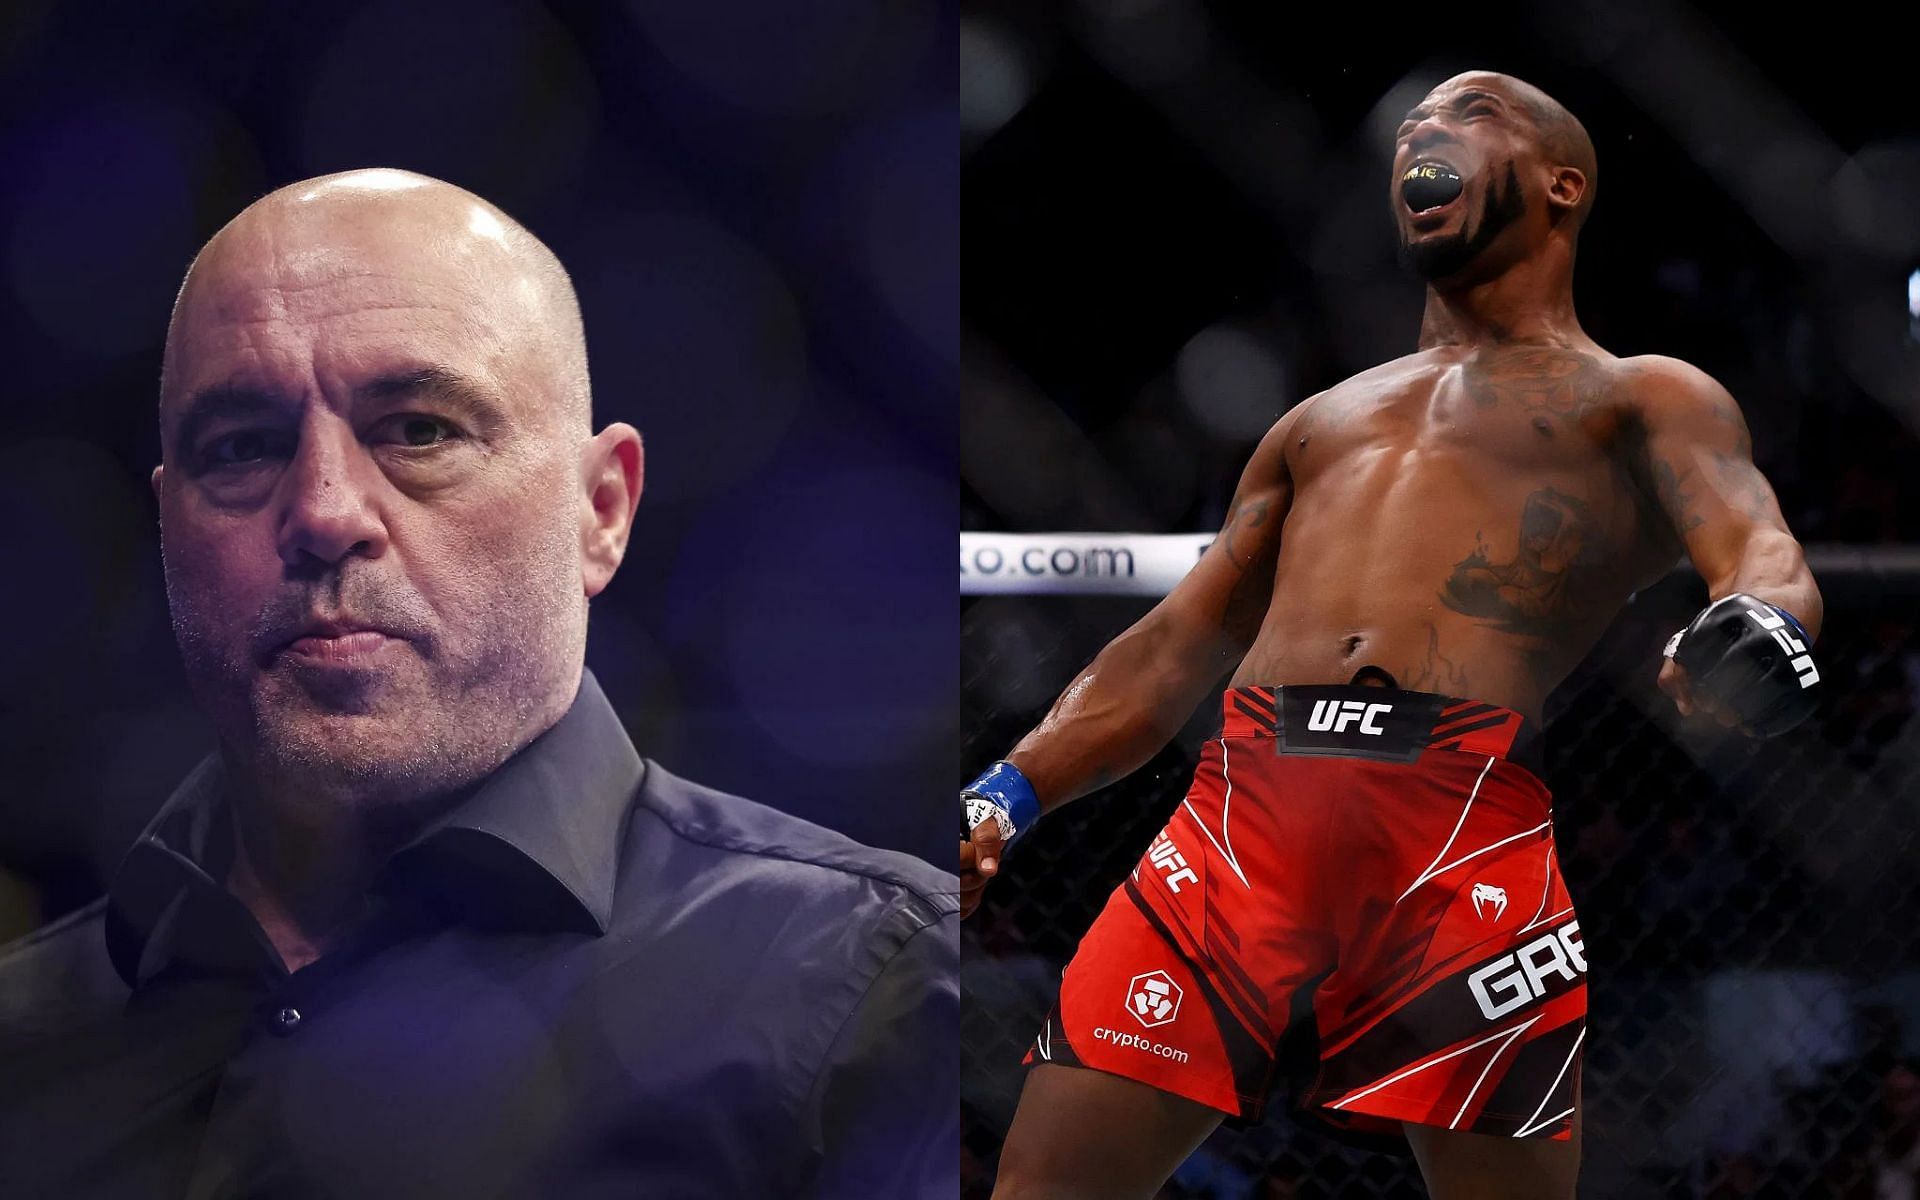 Joe Rogan (Left) and Bobby Green (Right) (Images courtesy of Getty)